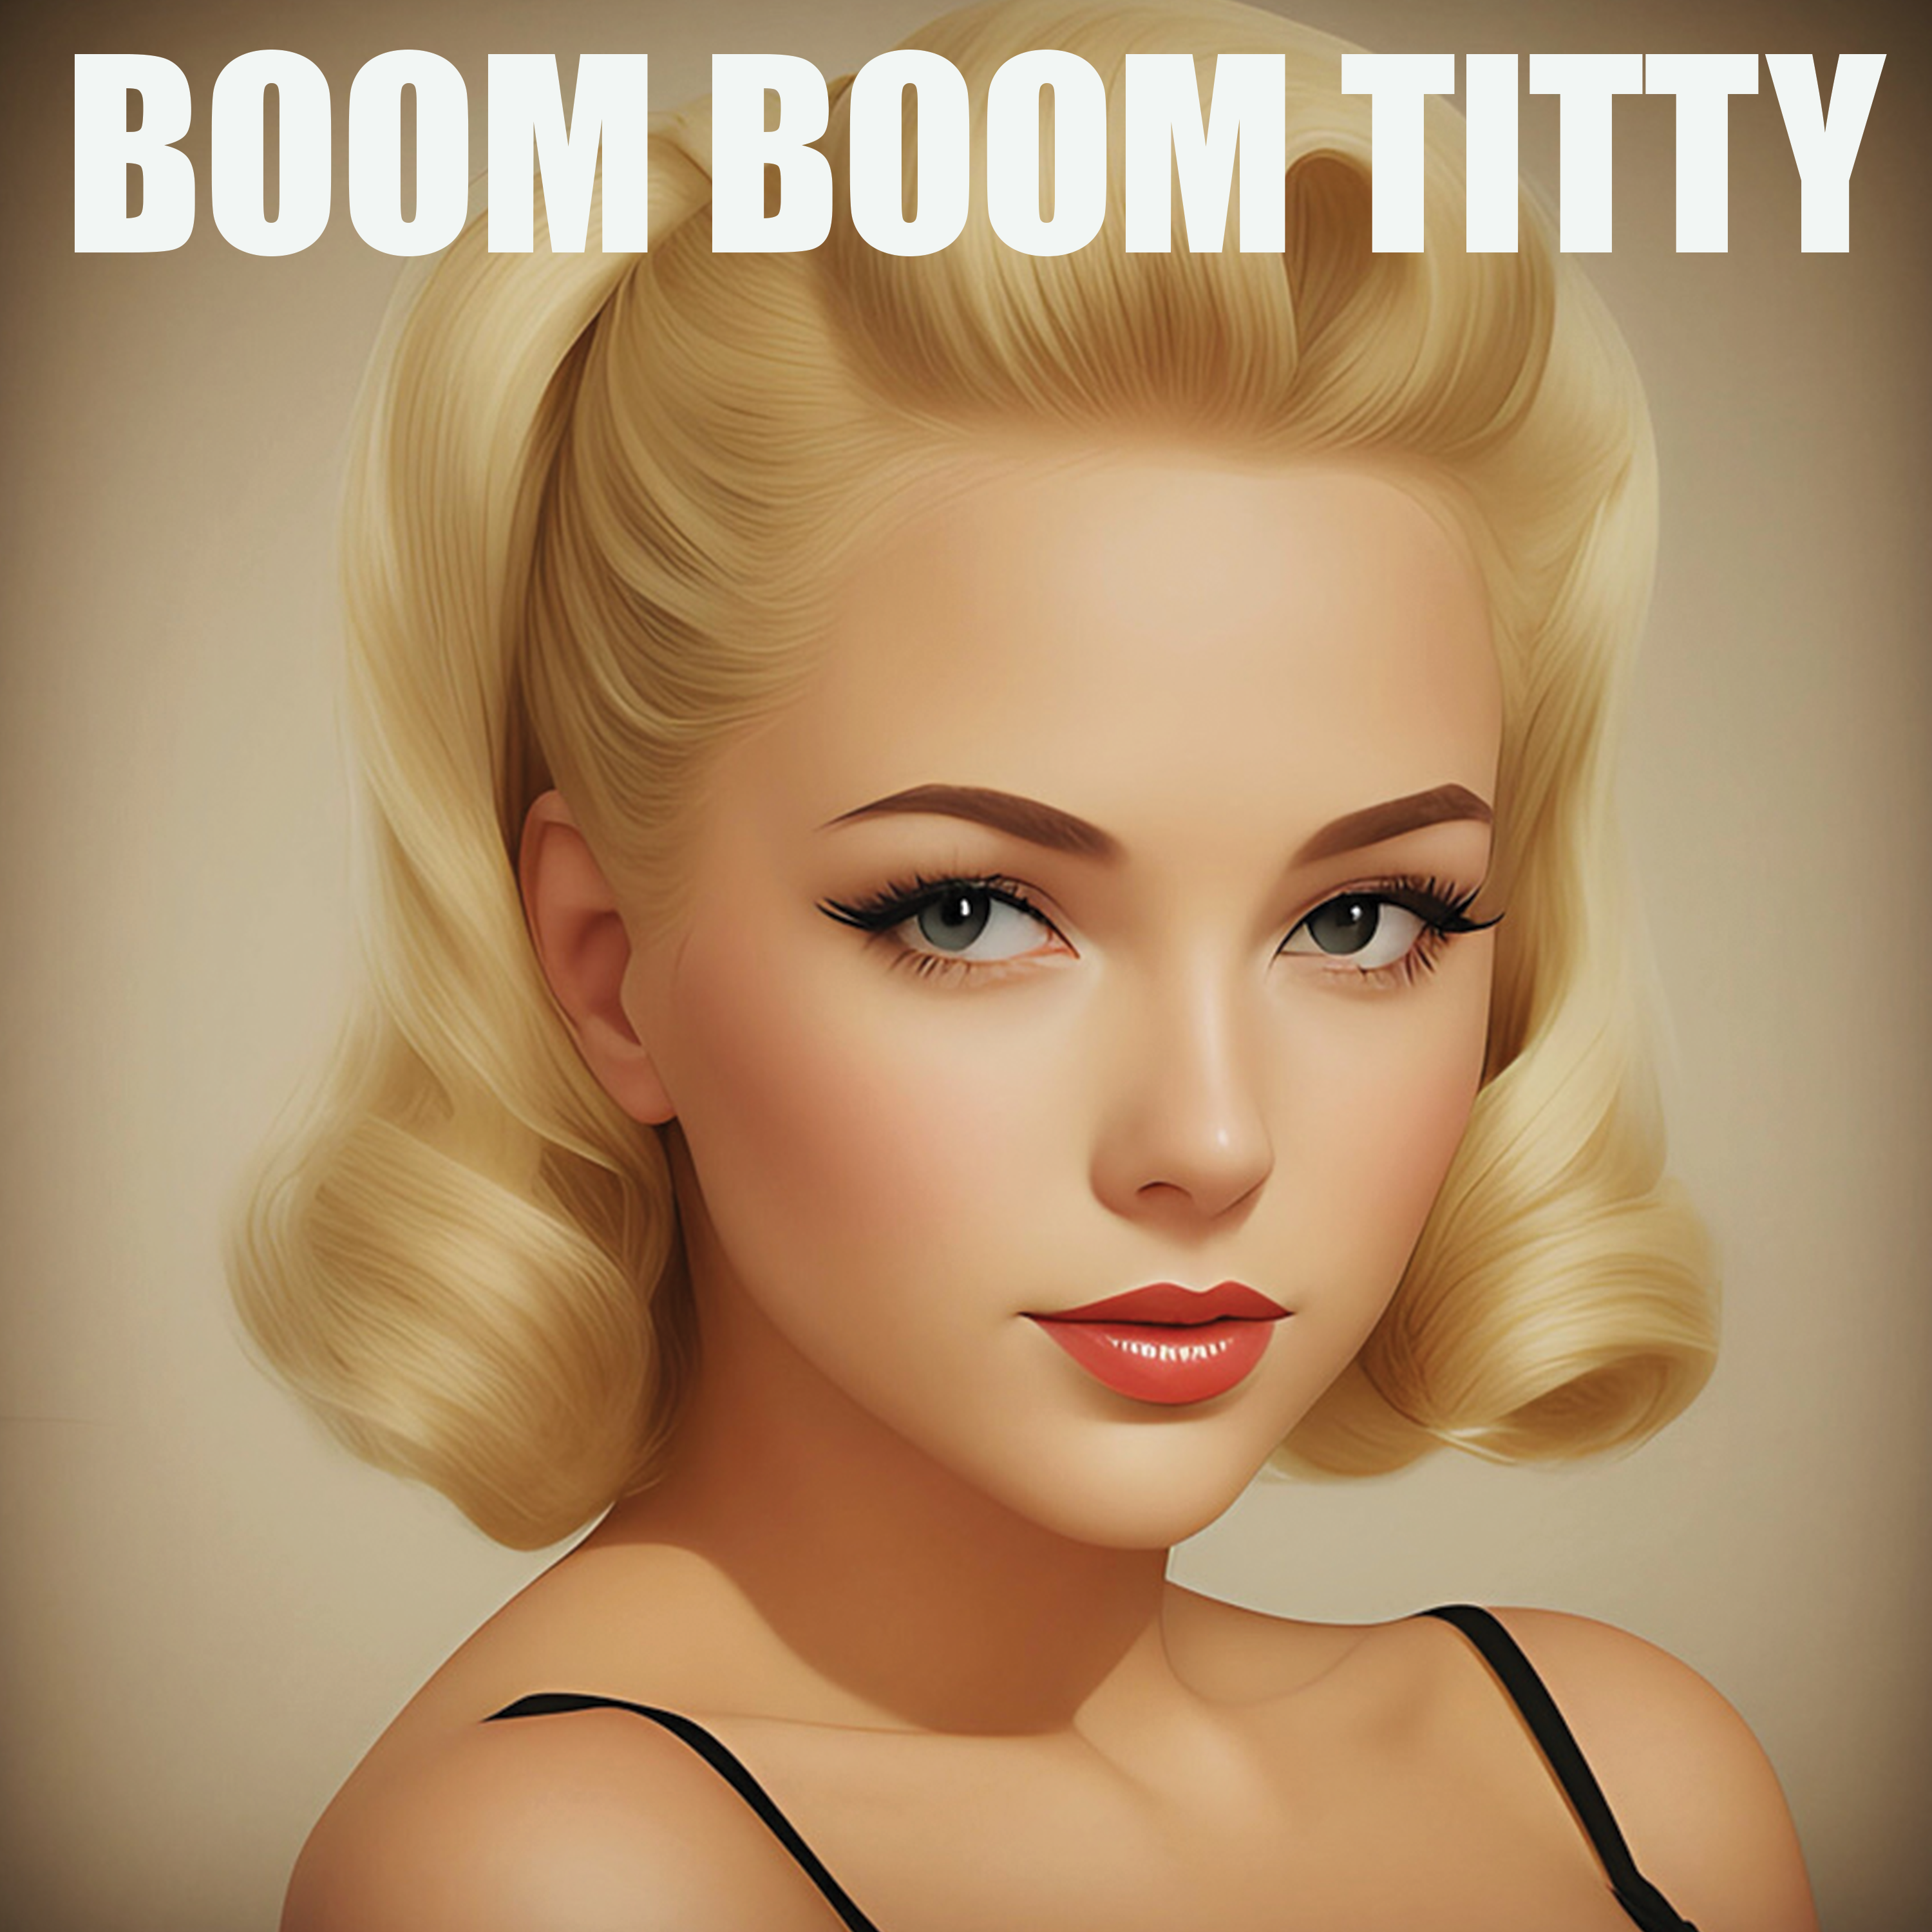 img src="Boom.png" striking blonde gazes inquisitively at the camera wondering what the boom boom will be">